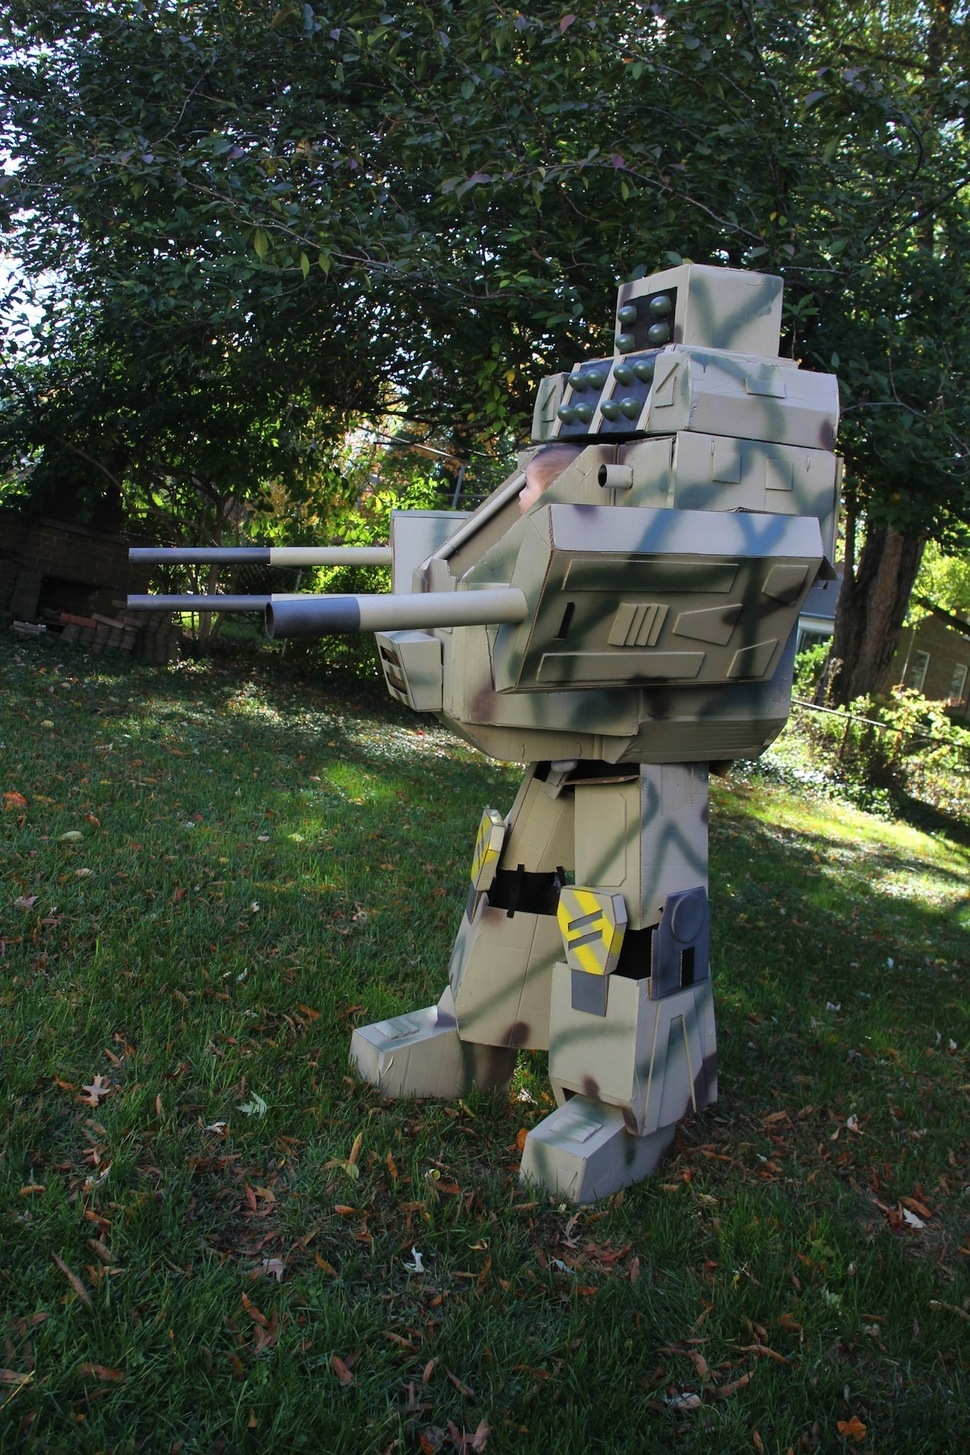 Geeky Dad Builds The Perfect Costume For Him And His 6-Month-Old Son